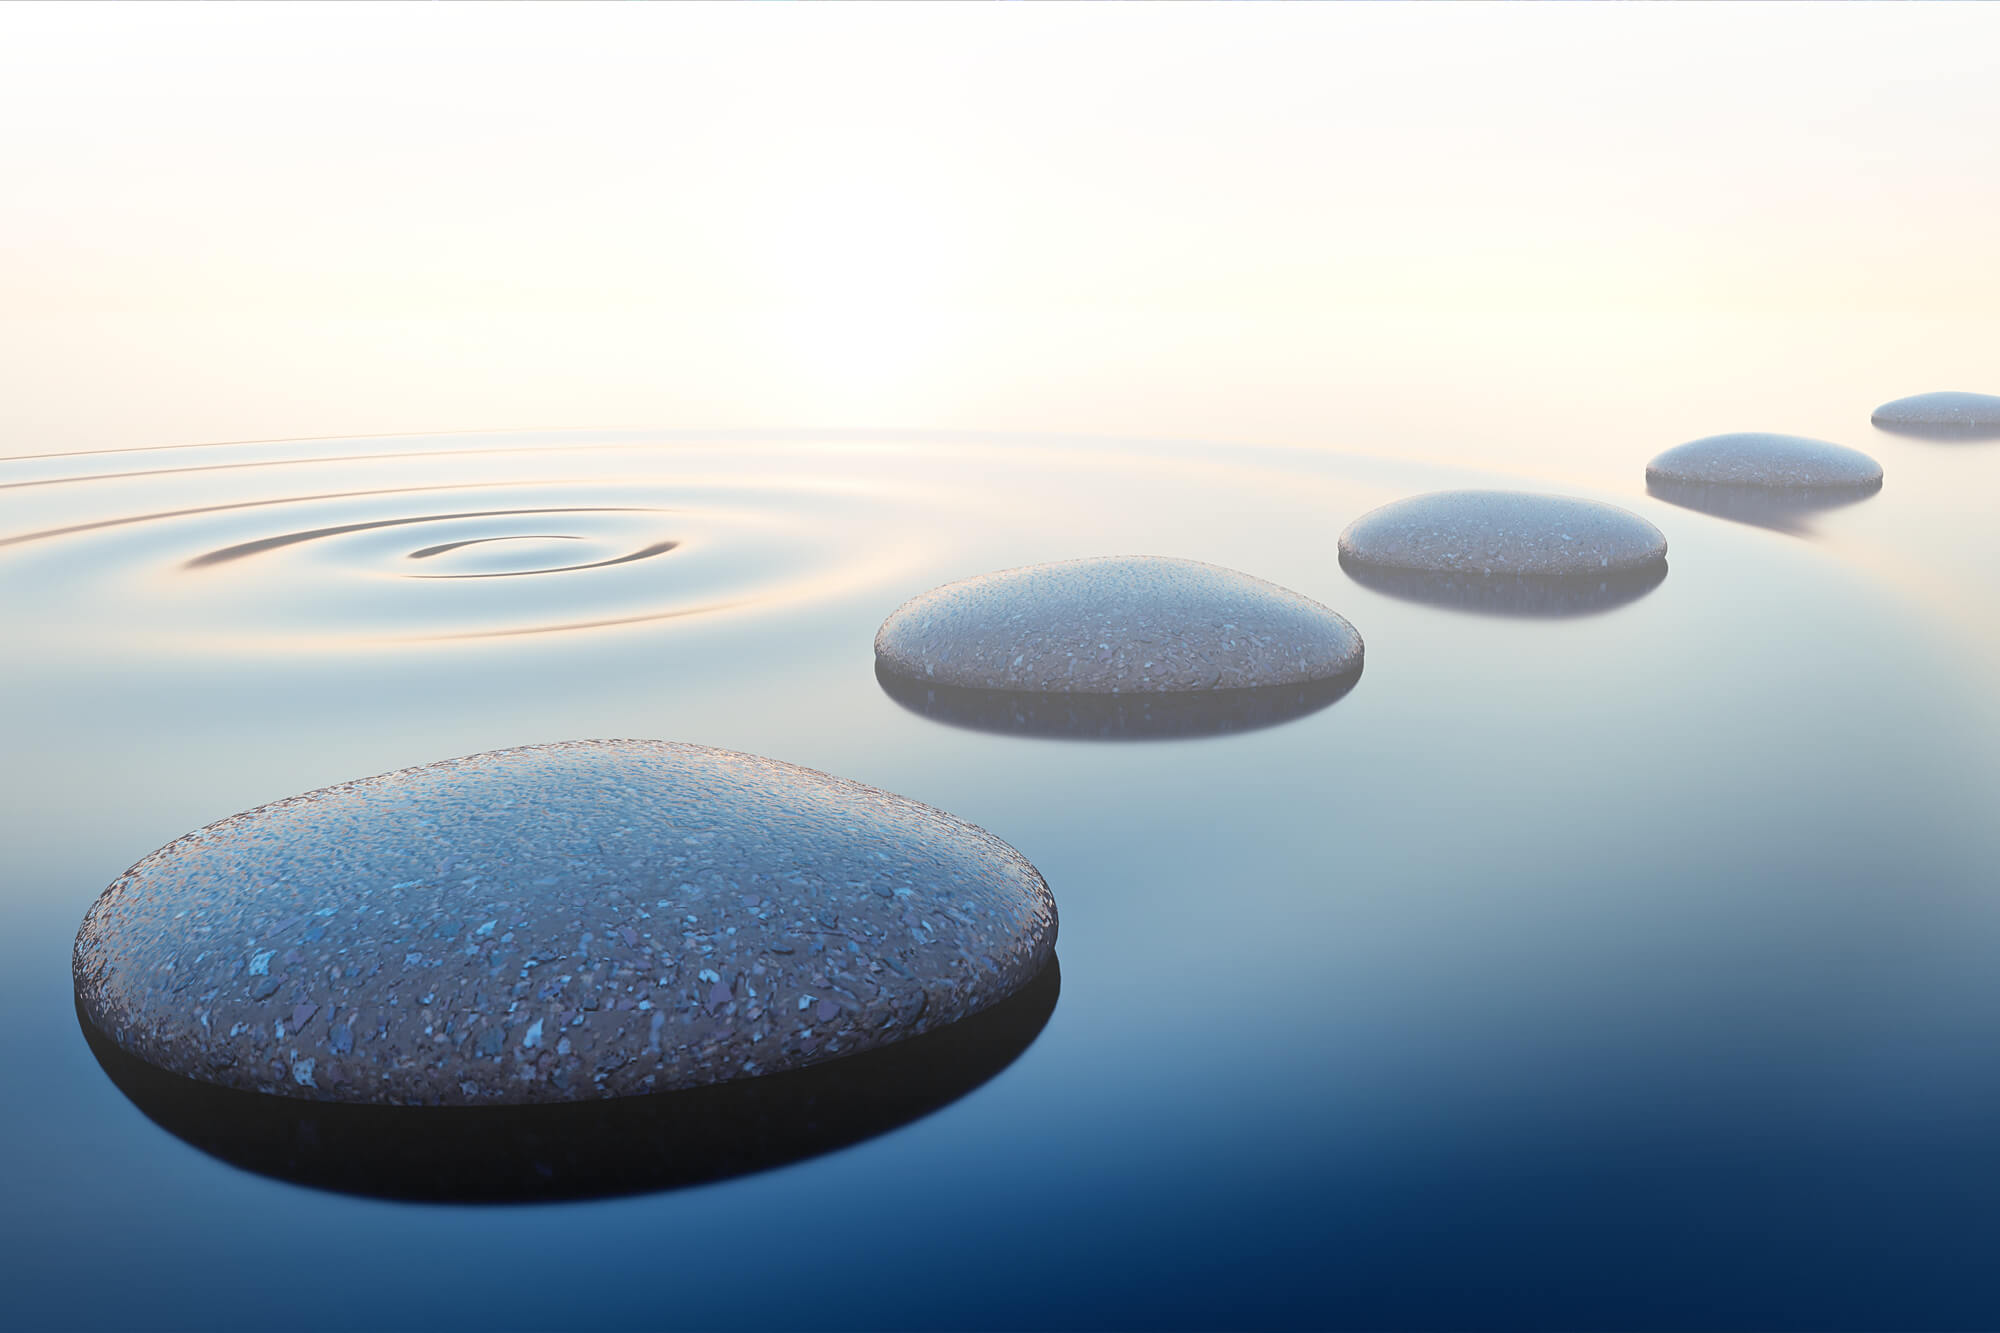 Photograph of walking stones in a pool of water.